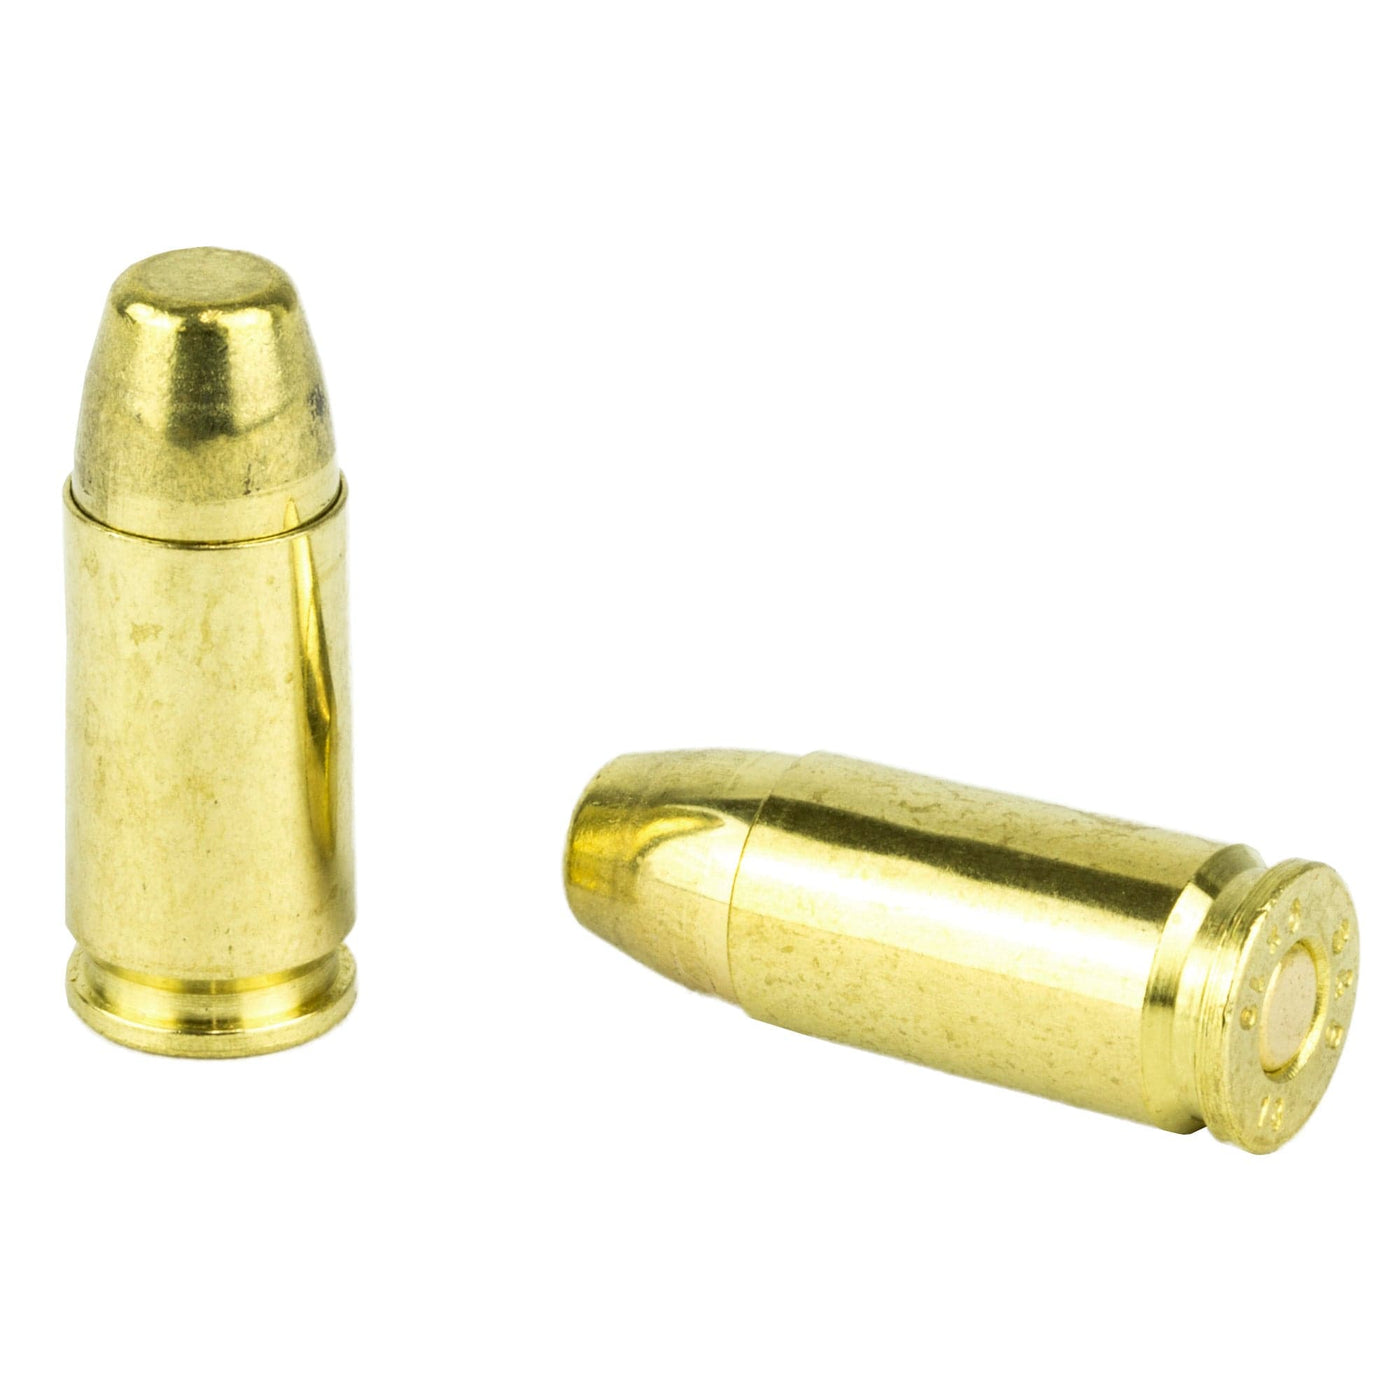 Sellier & Bellot S&b 9mm Subsonic 150gr Fmj 50/1000 Ammo